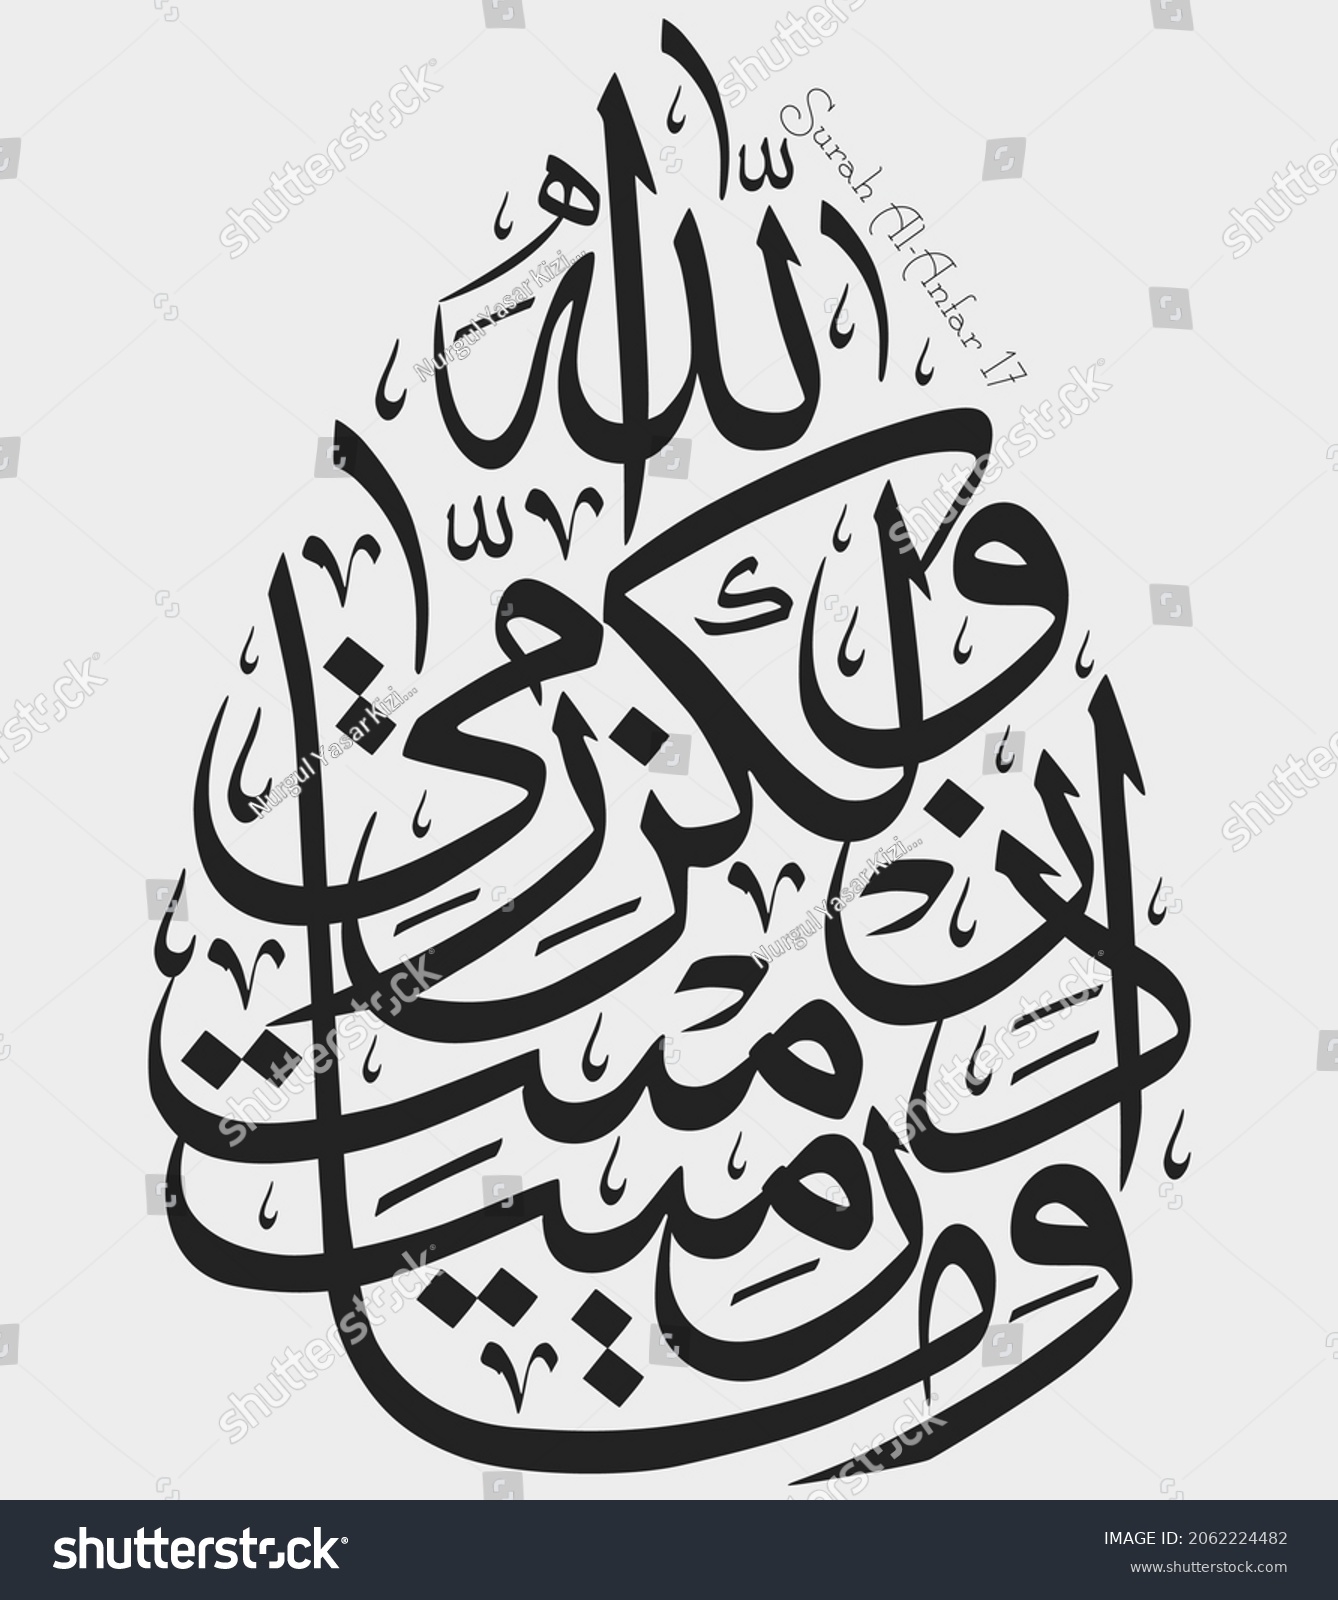 SVG of Islamic Calligraphy for Quran Surah Al-Anfar 17. Translated: O Muḥammad, when you threw, but it was Allah. svg